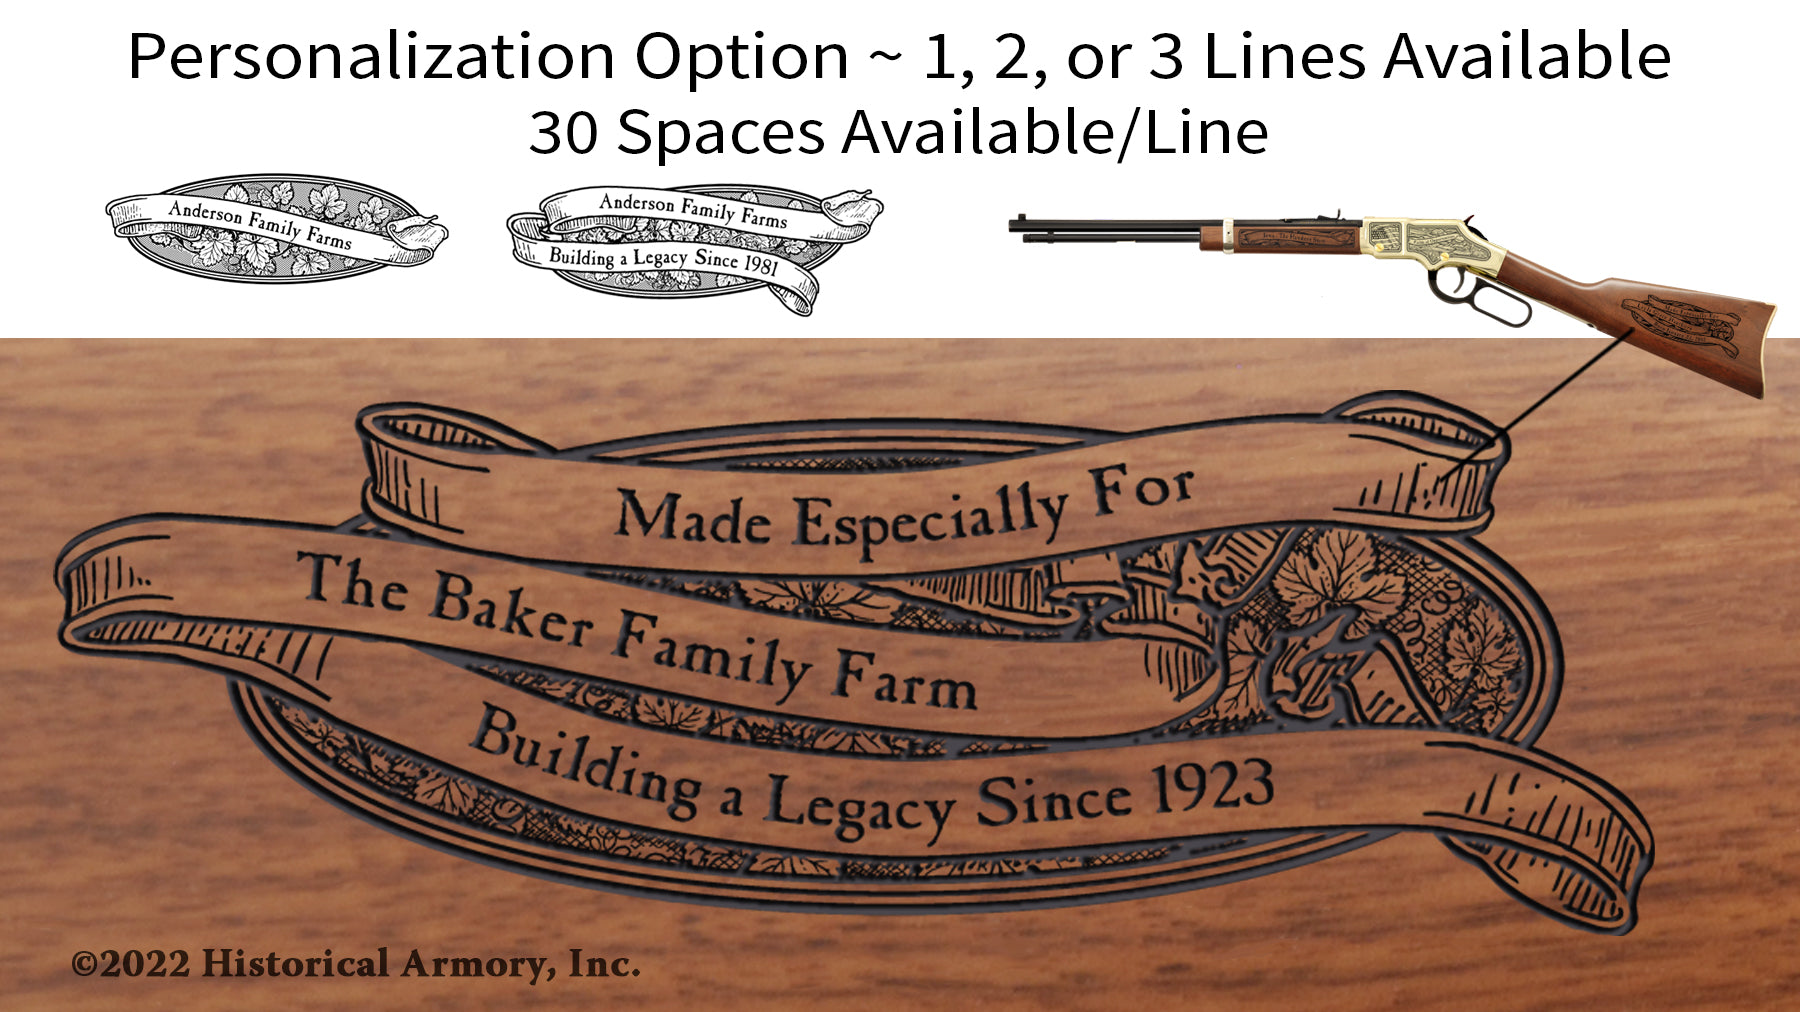 California State Agricultural Heritage Engraved Rifle Personalization